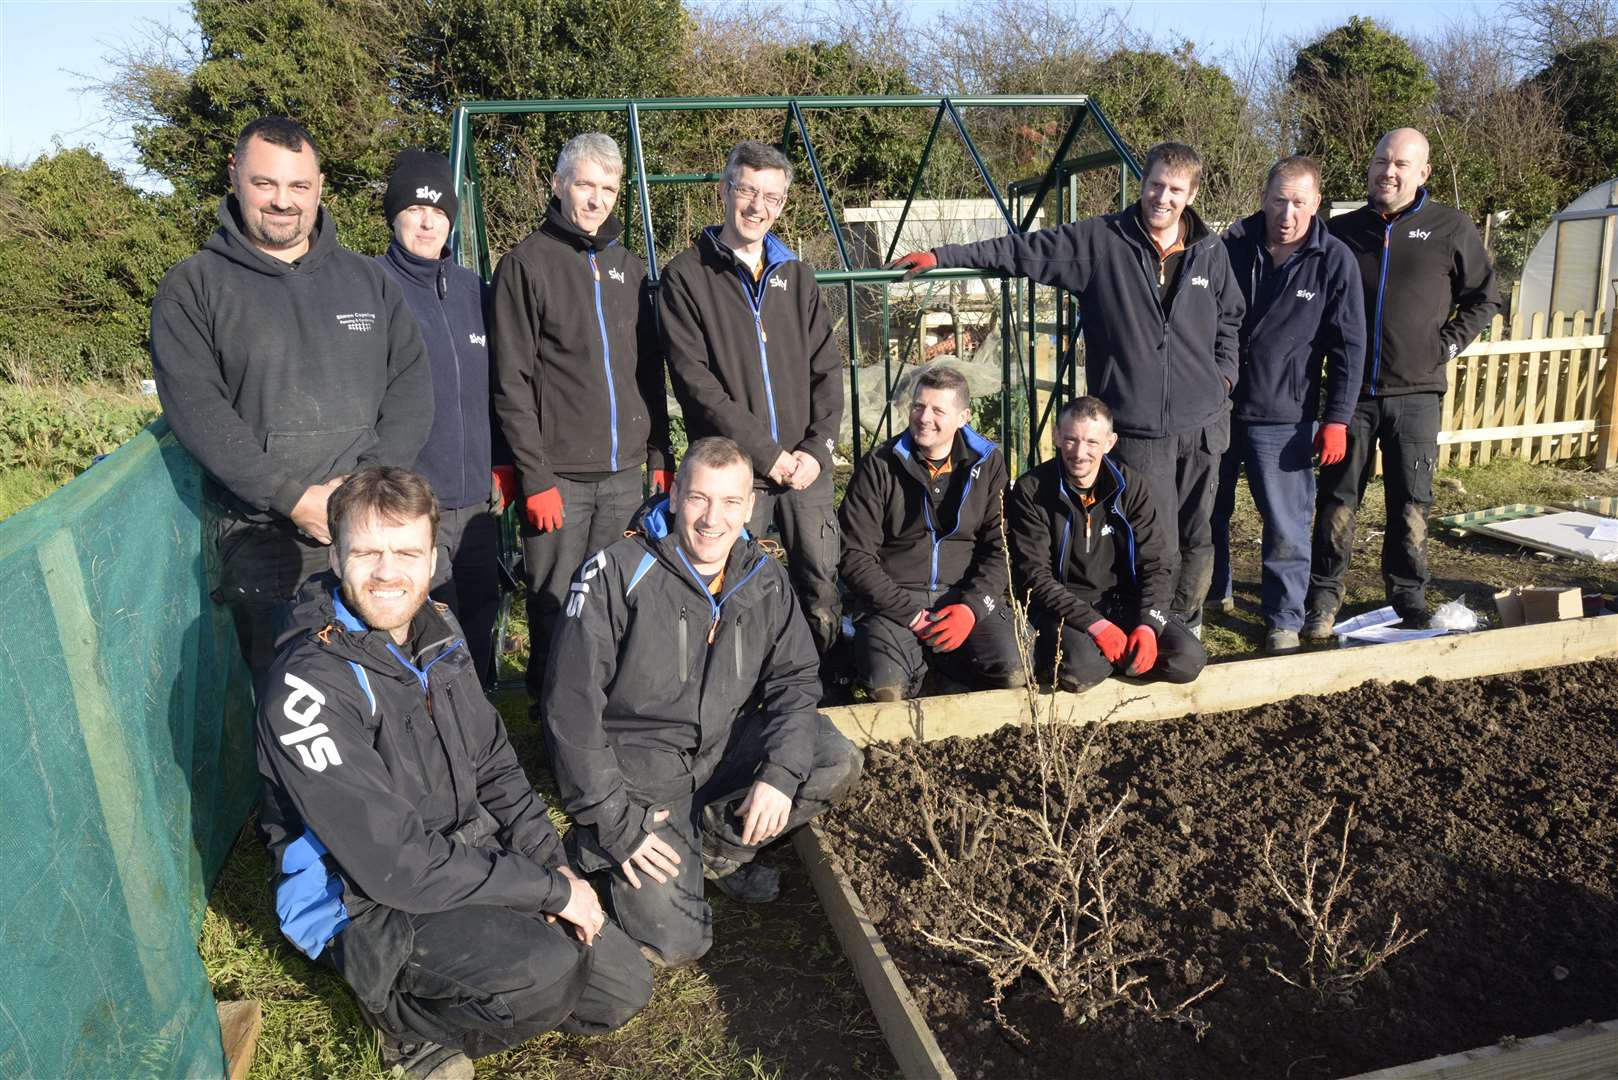 Sky engineers who have transformed the Bright Sparks Nursery allotment in Church Lane, Deal